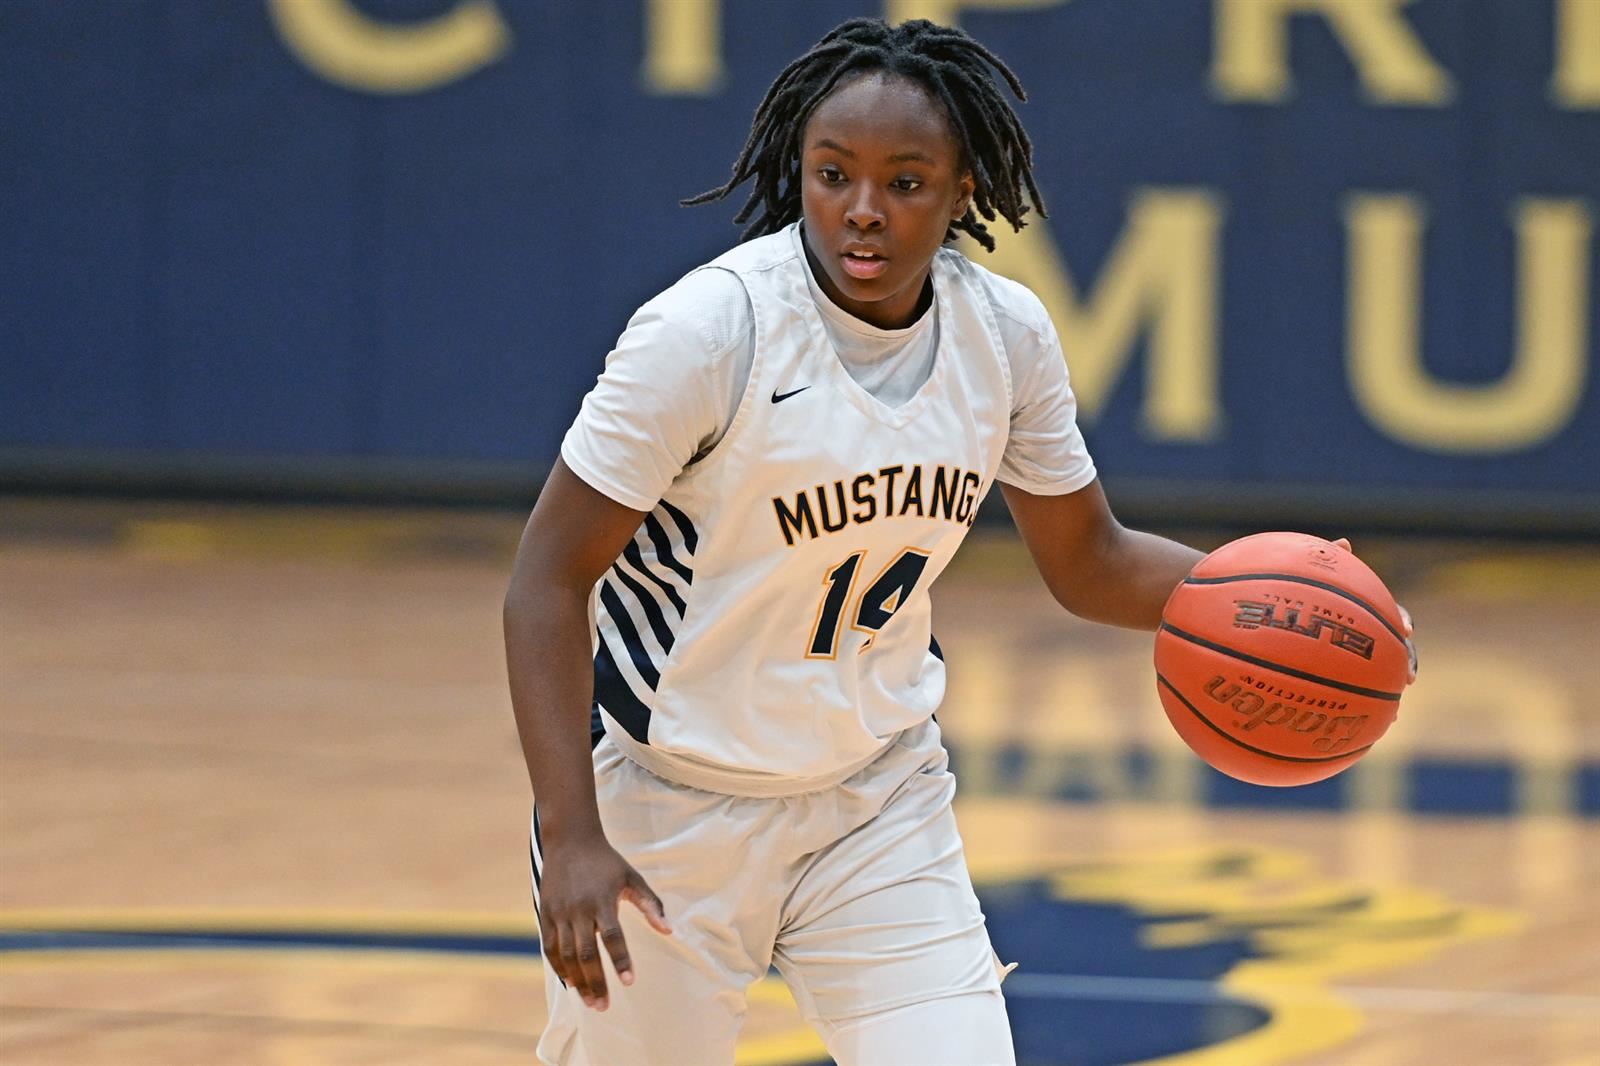 Cypress Ranch High School senior Chelsy Singleton was voted District 16-6A’s Defensive Player of the Year.